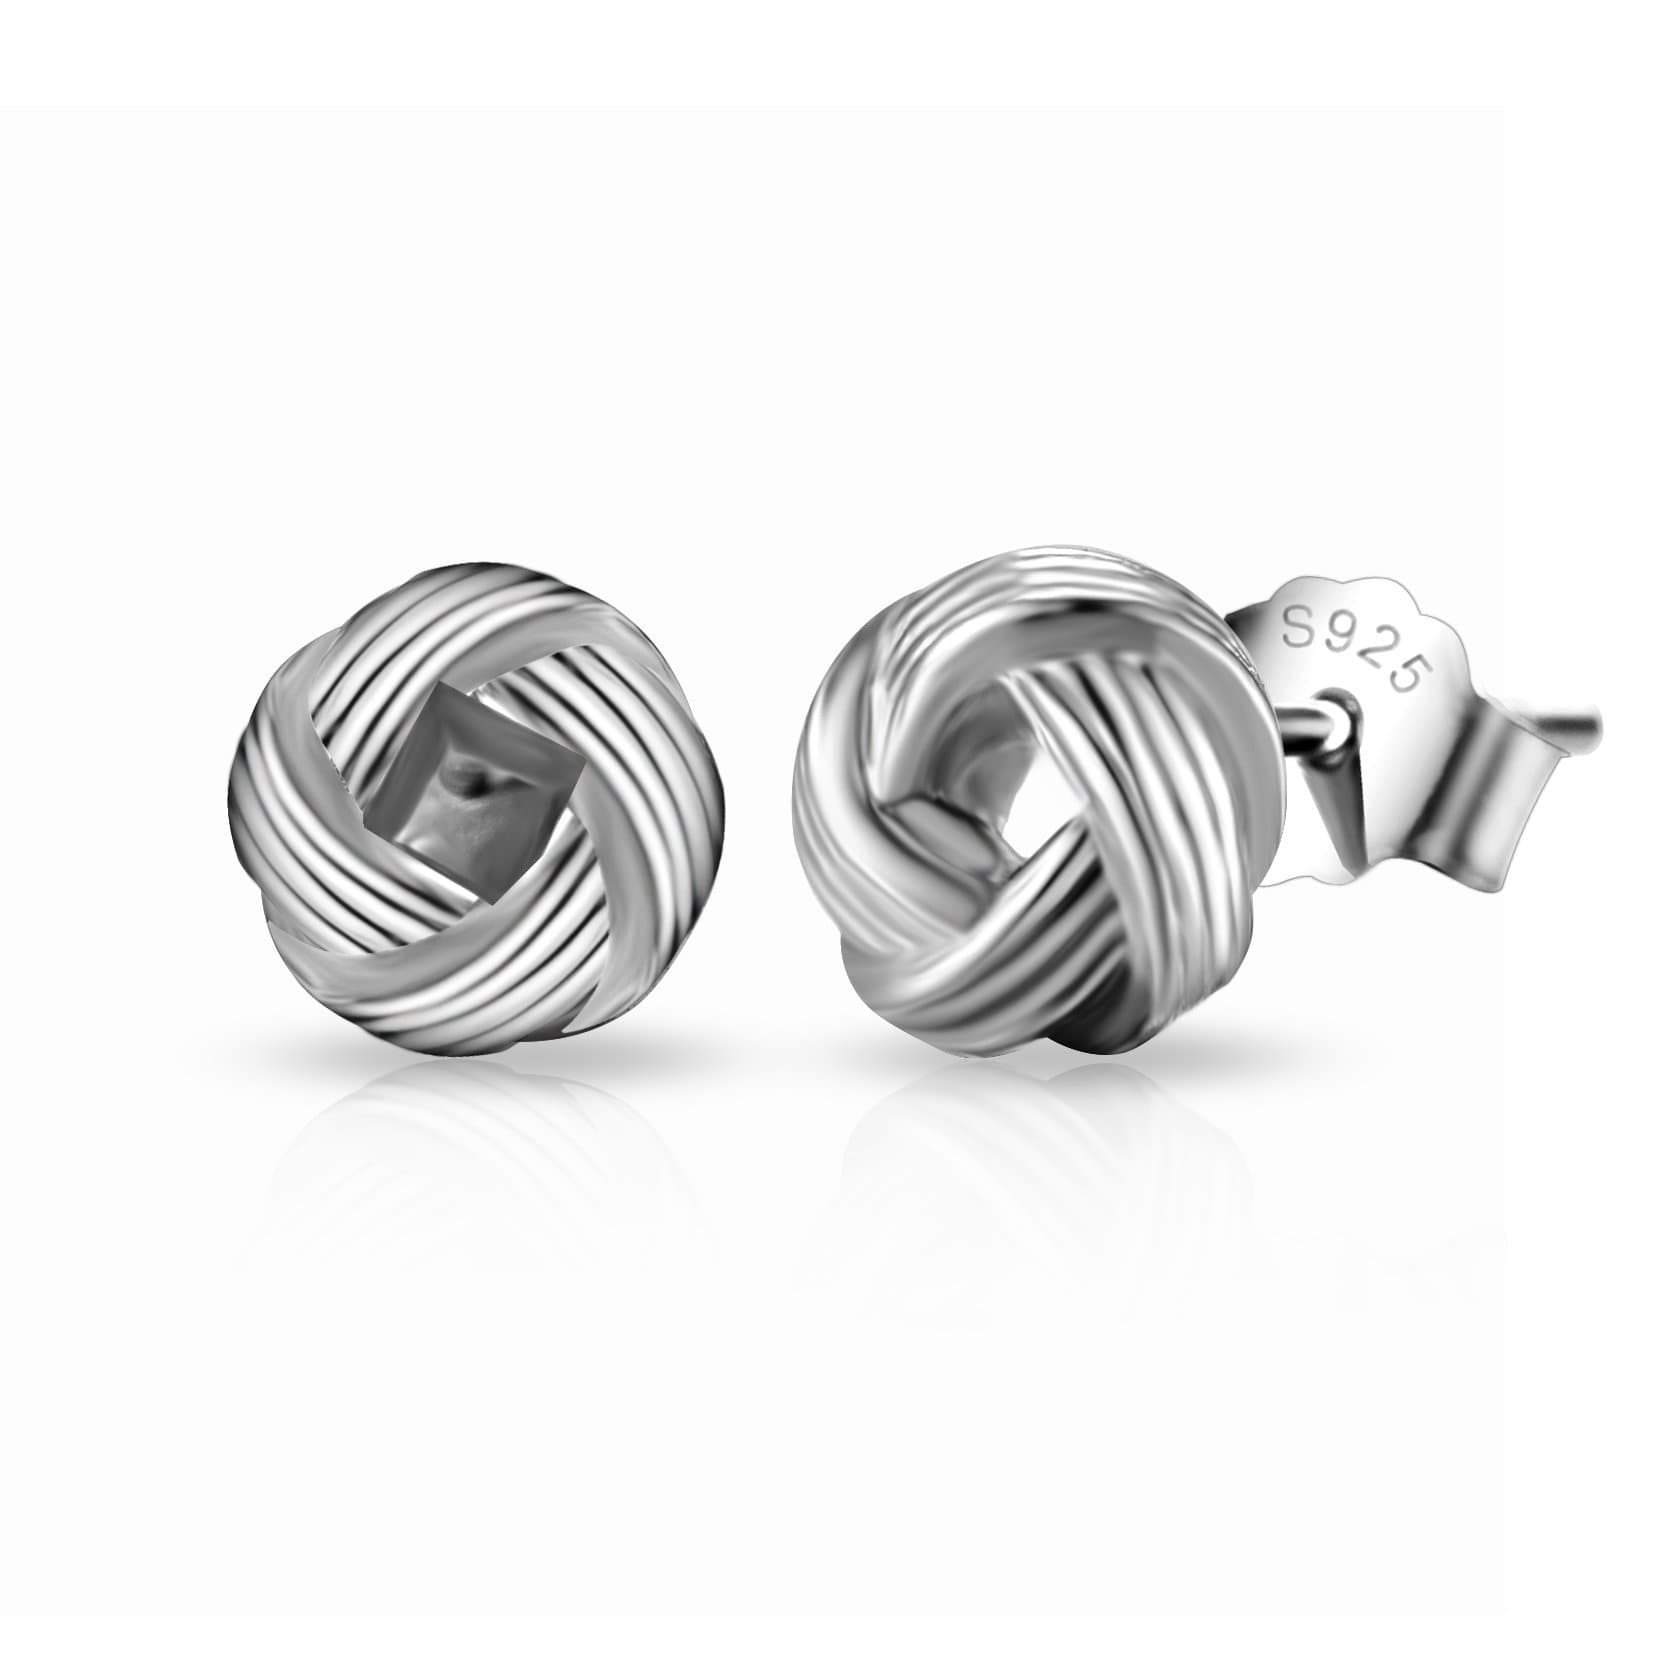 Sterling Silver Thank You for Helping us Tie The Knot Earrings